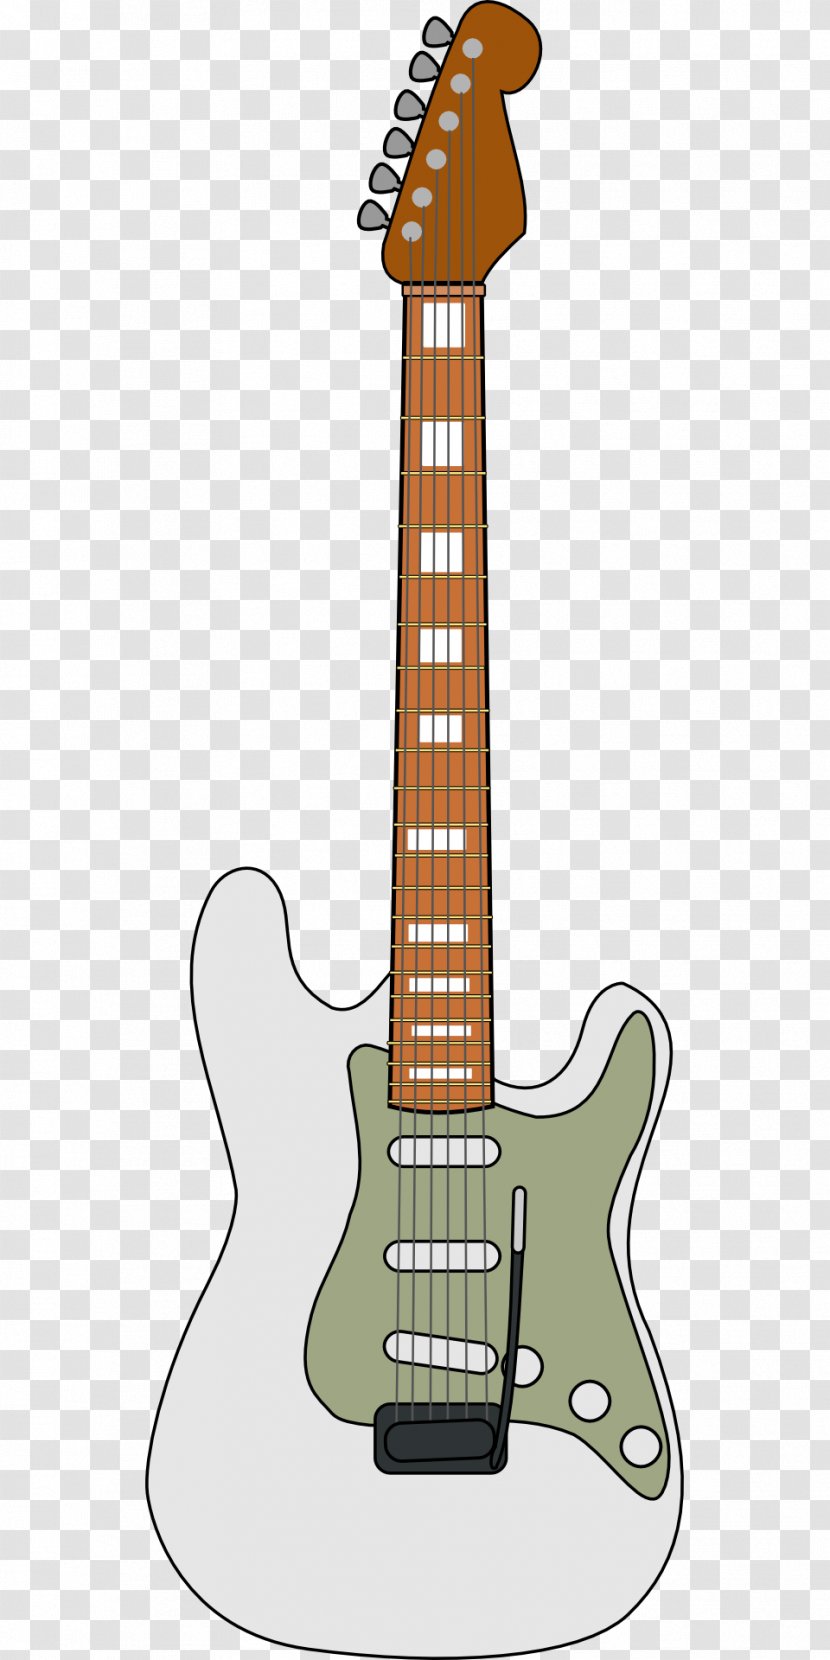 Electric Guitar Fender Musical Instruments Corporation Stratocaster - Cartoon - Drawing Transparent PNG